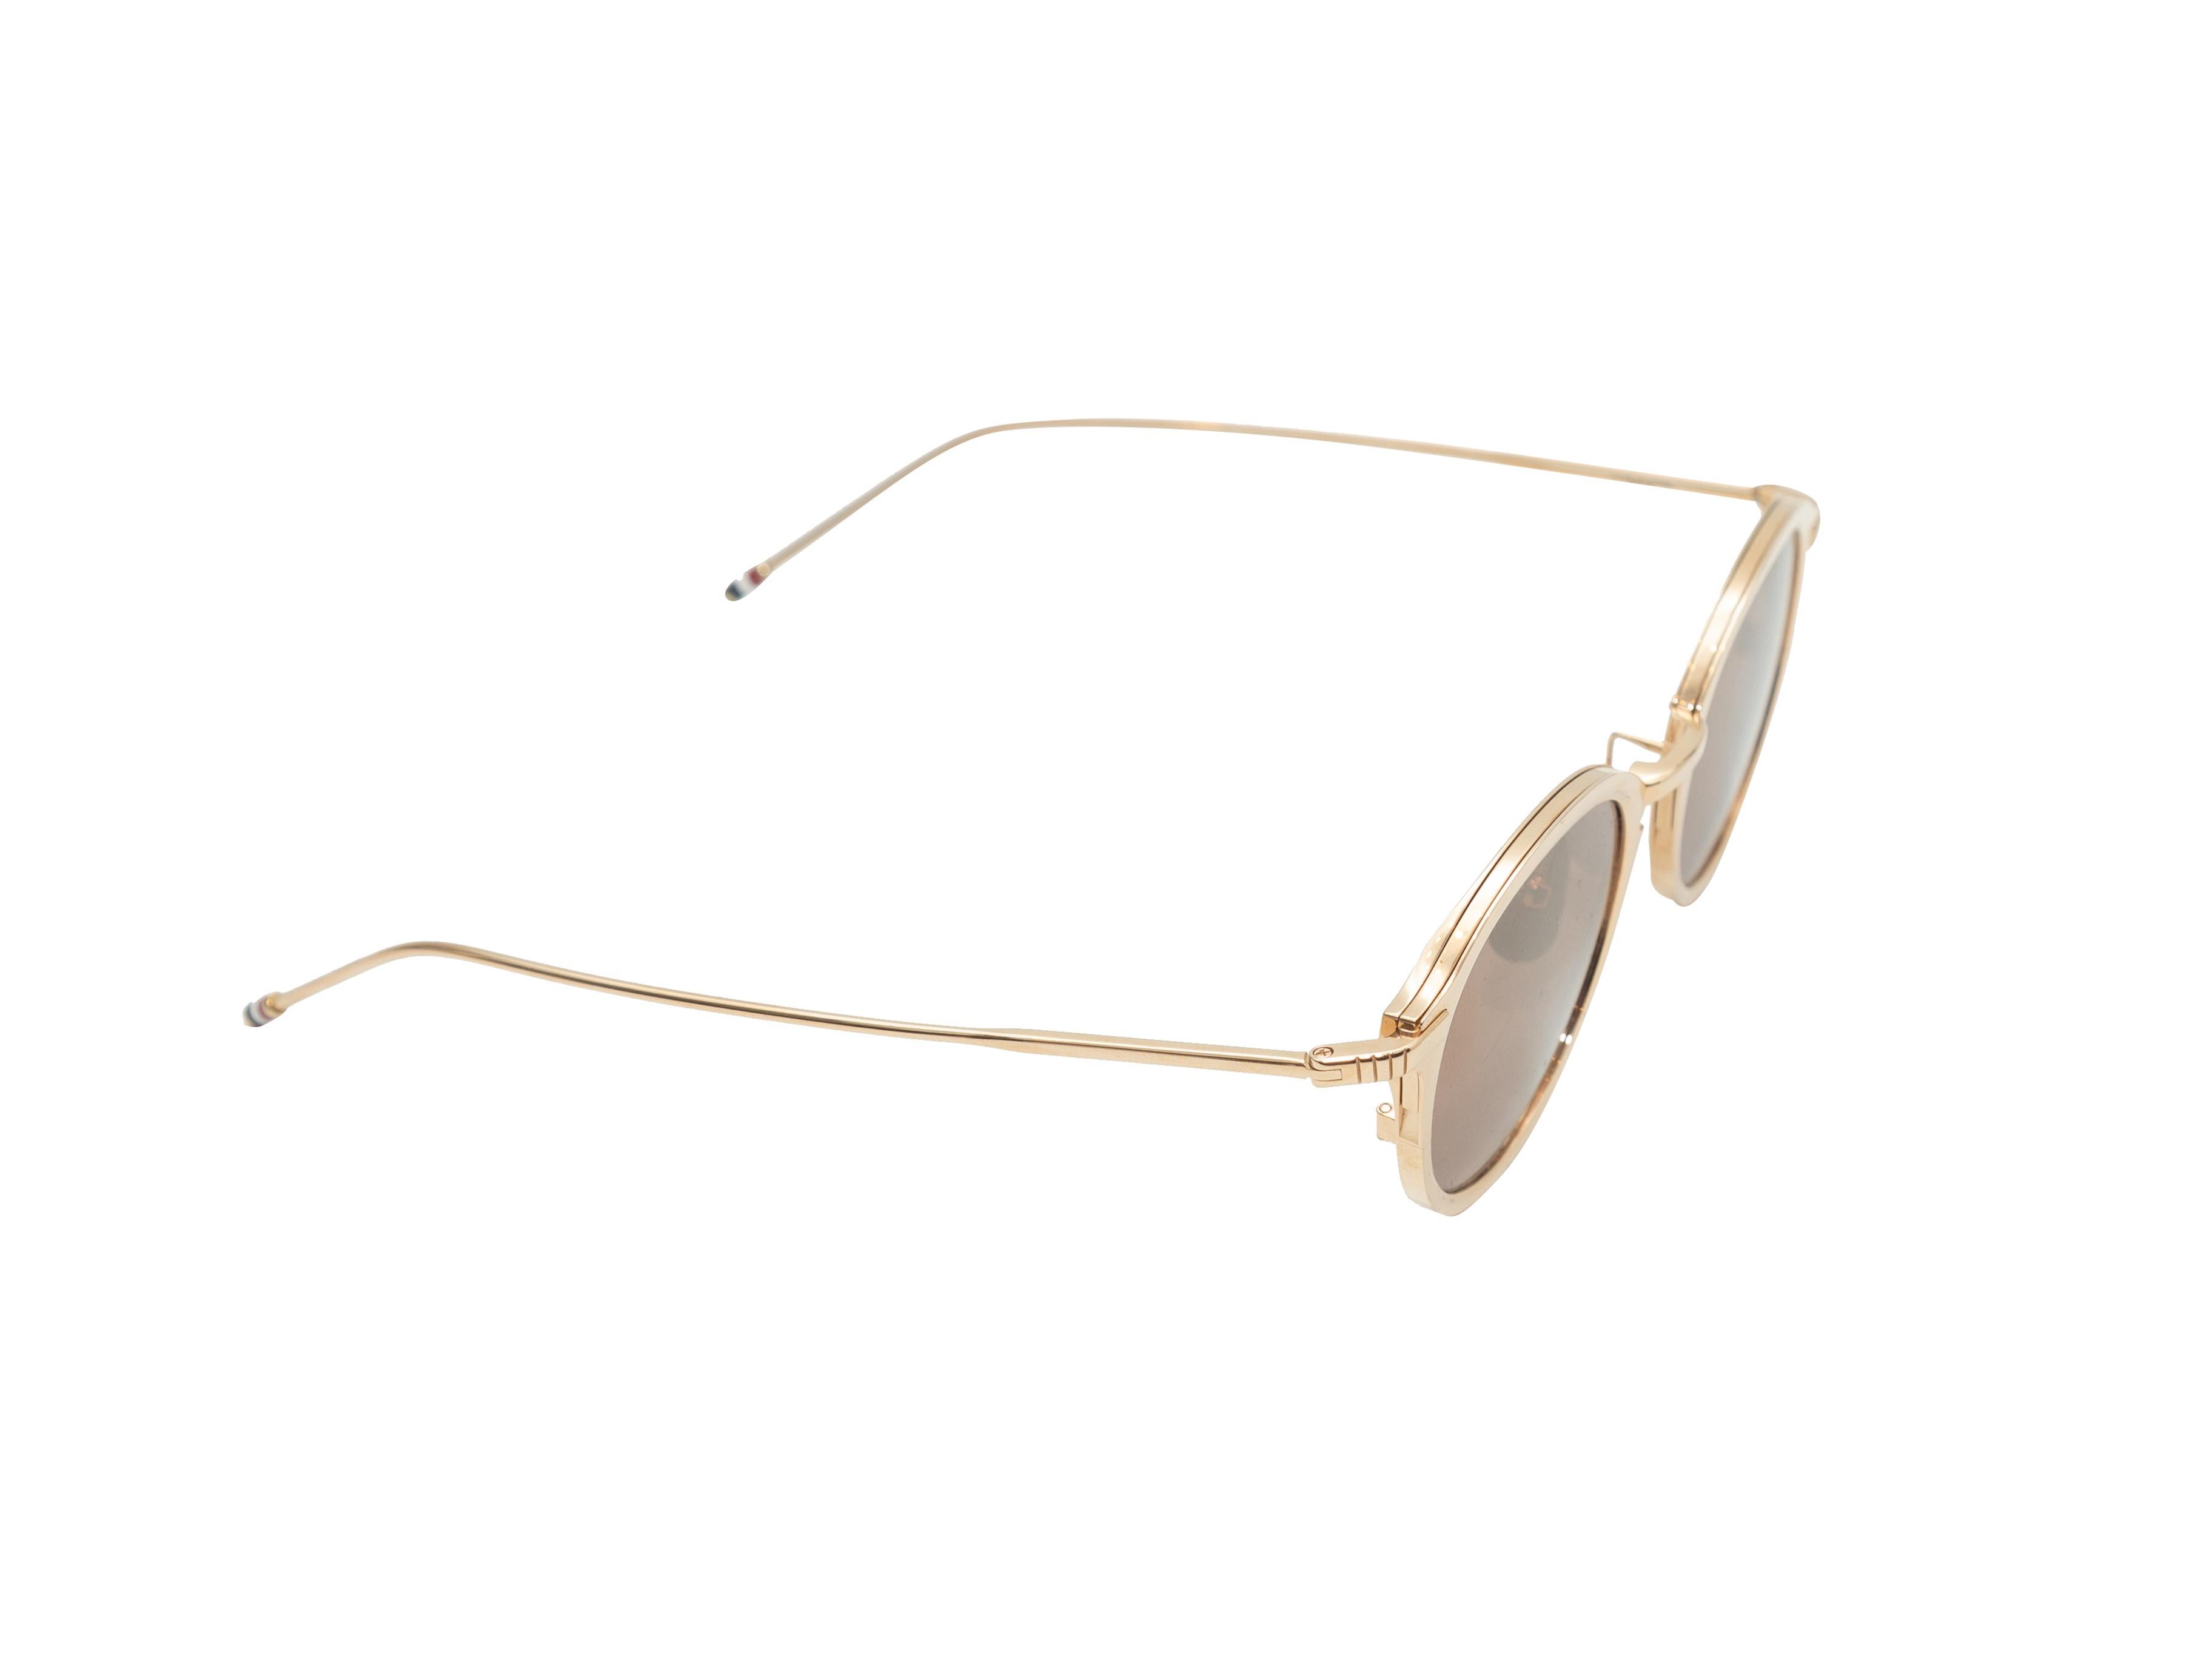 Product details: Gold mirrored round sunglasses by Thom Browne. 1.8